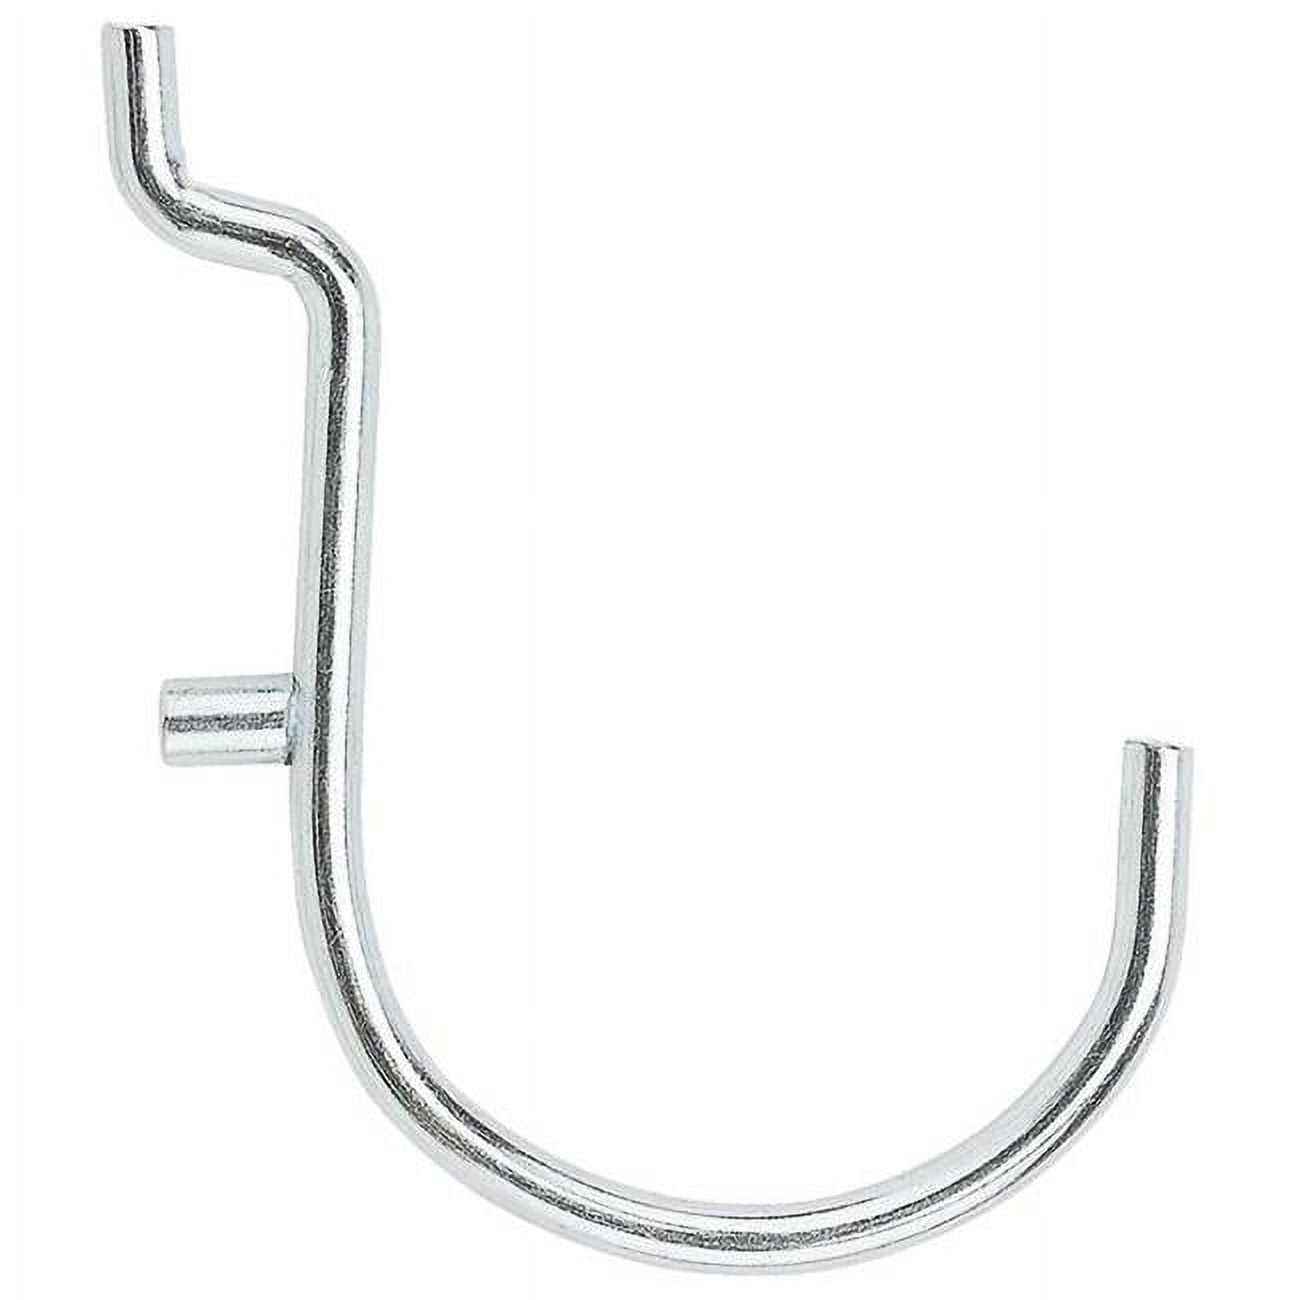 NATIONAL MANUFACTURING COMPANY 5/8 Heavy-Duty Curved Pegboard Hook, 8-Pack  - Quantity 1 National Hardware